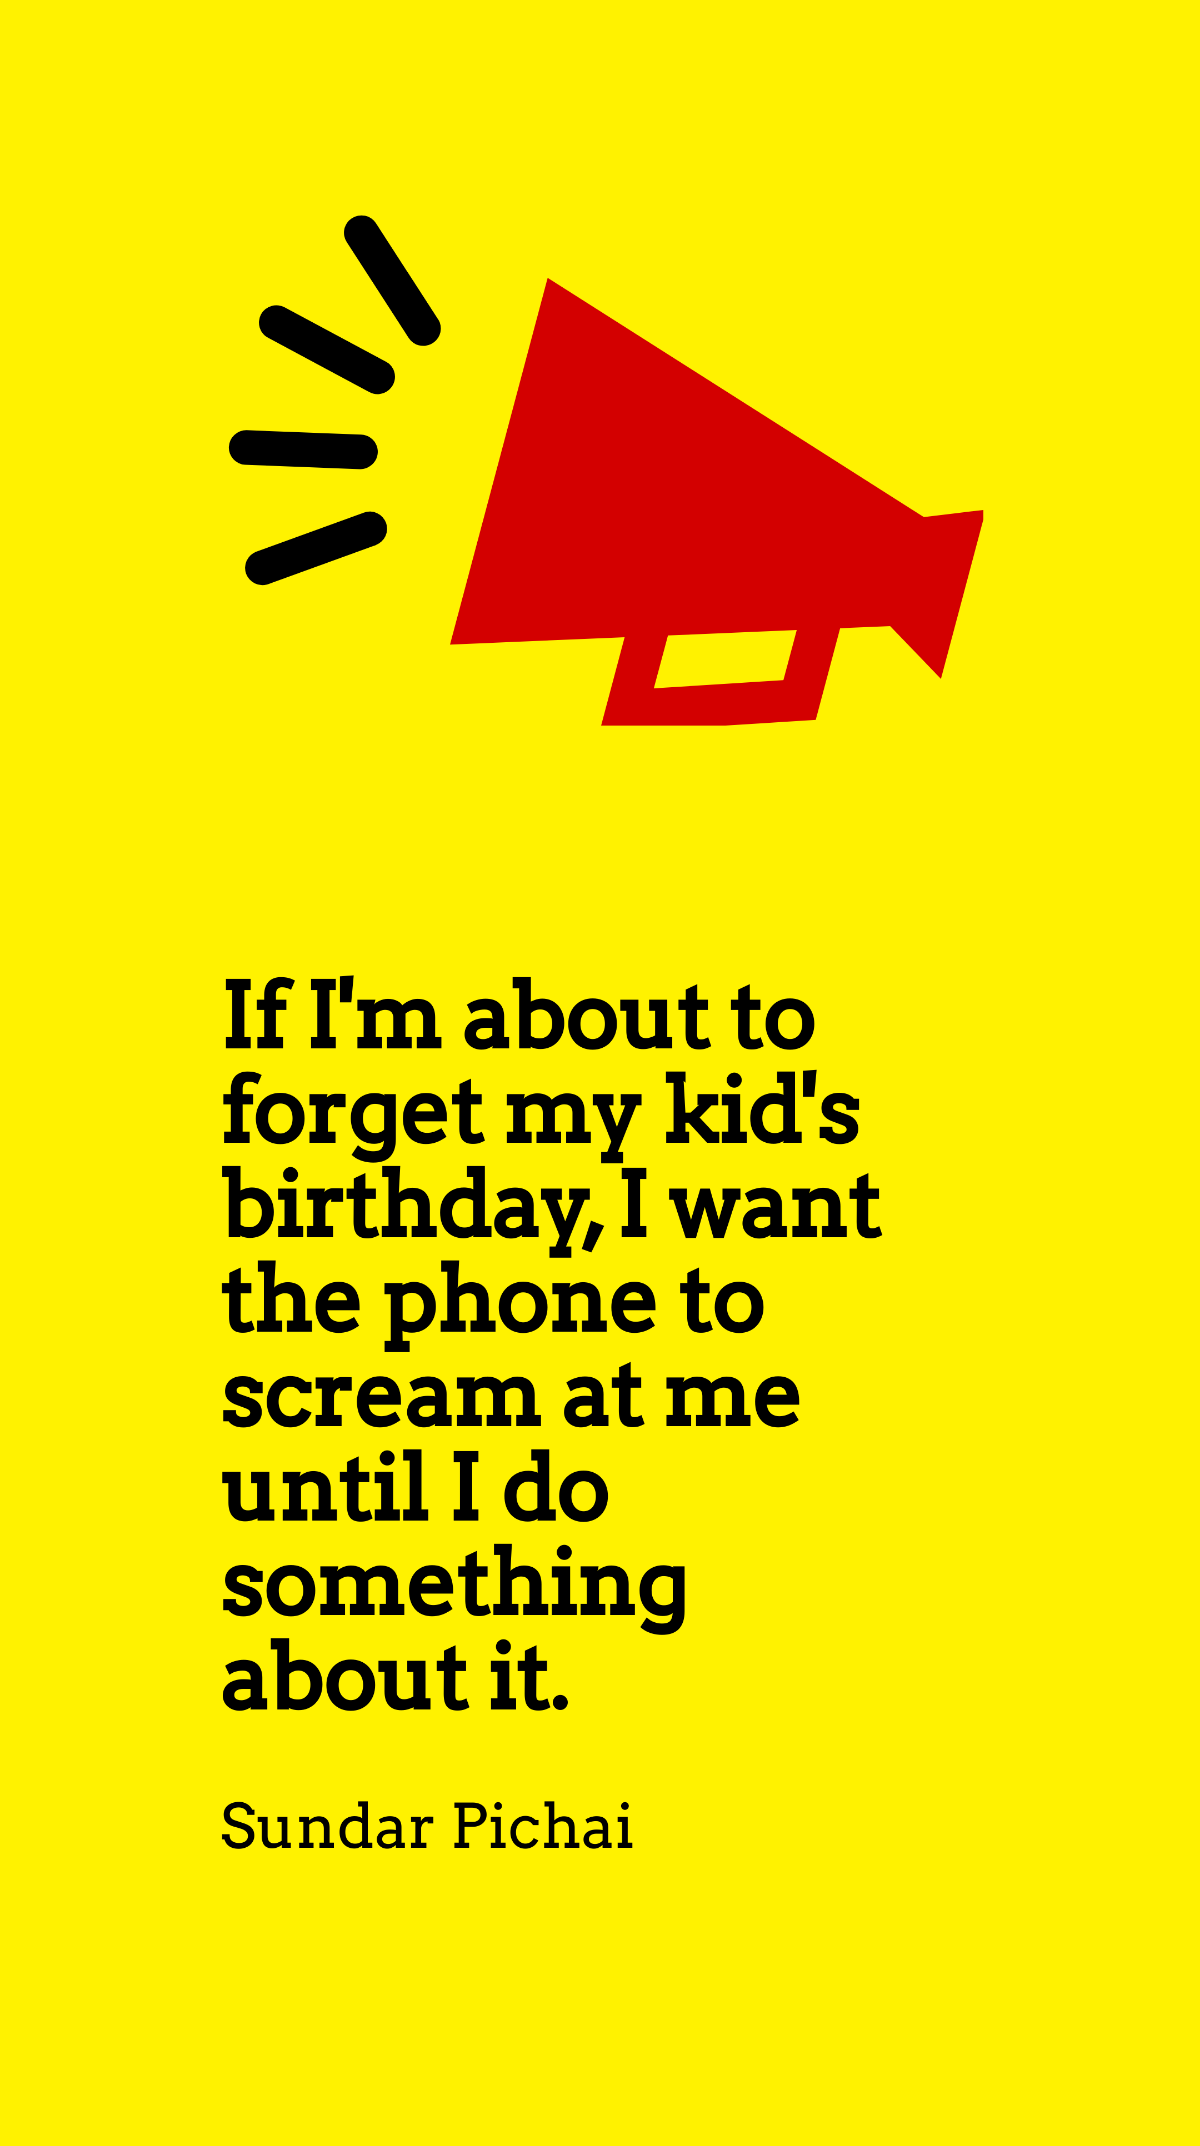 Sundar Pichai - If I'm about to forget my kid's birthday, I want the phone to scream at me until I do something about it. Template